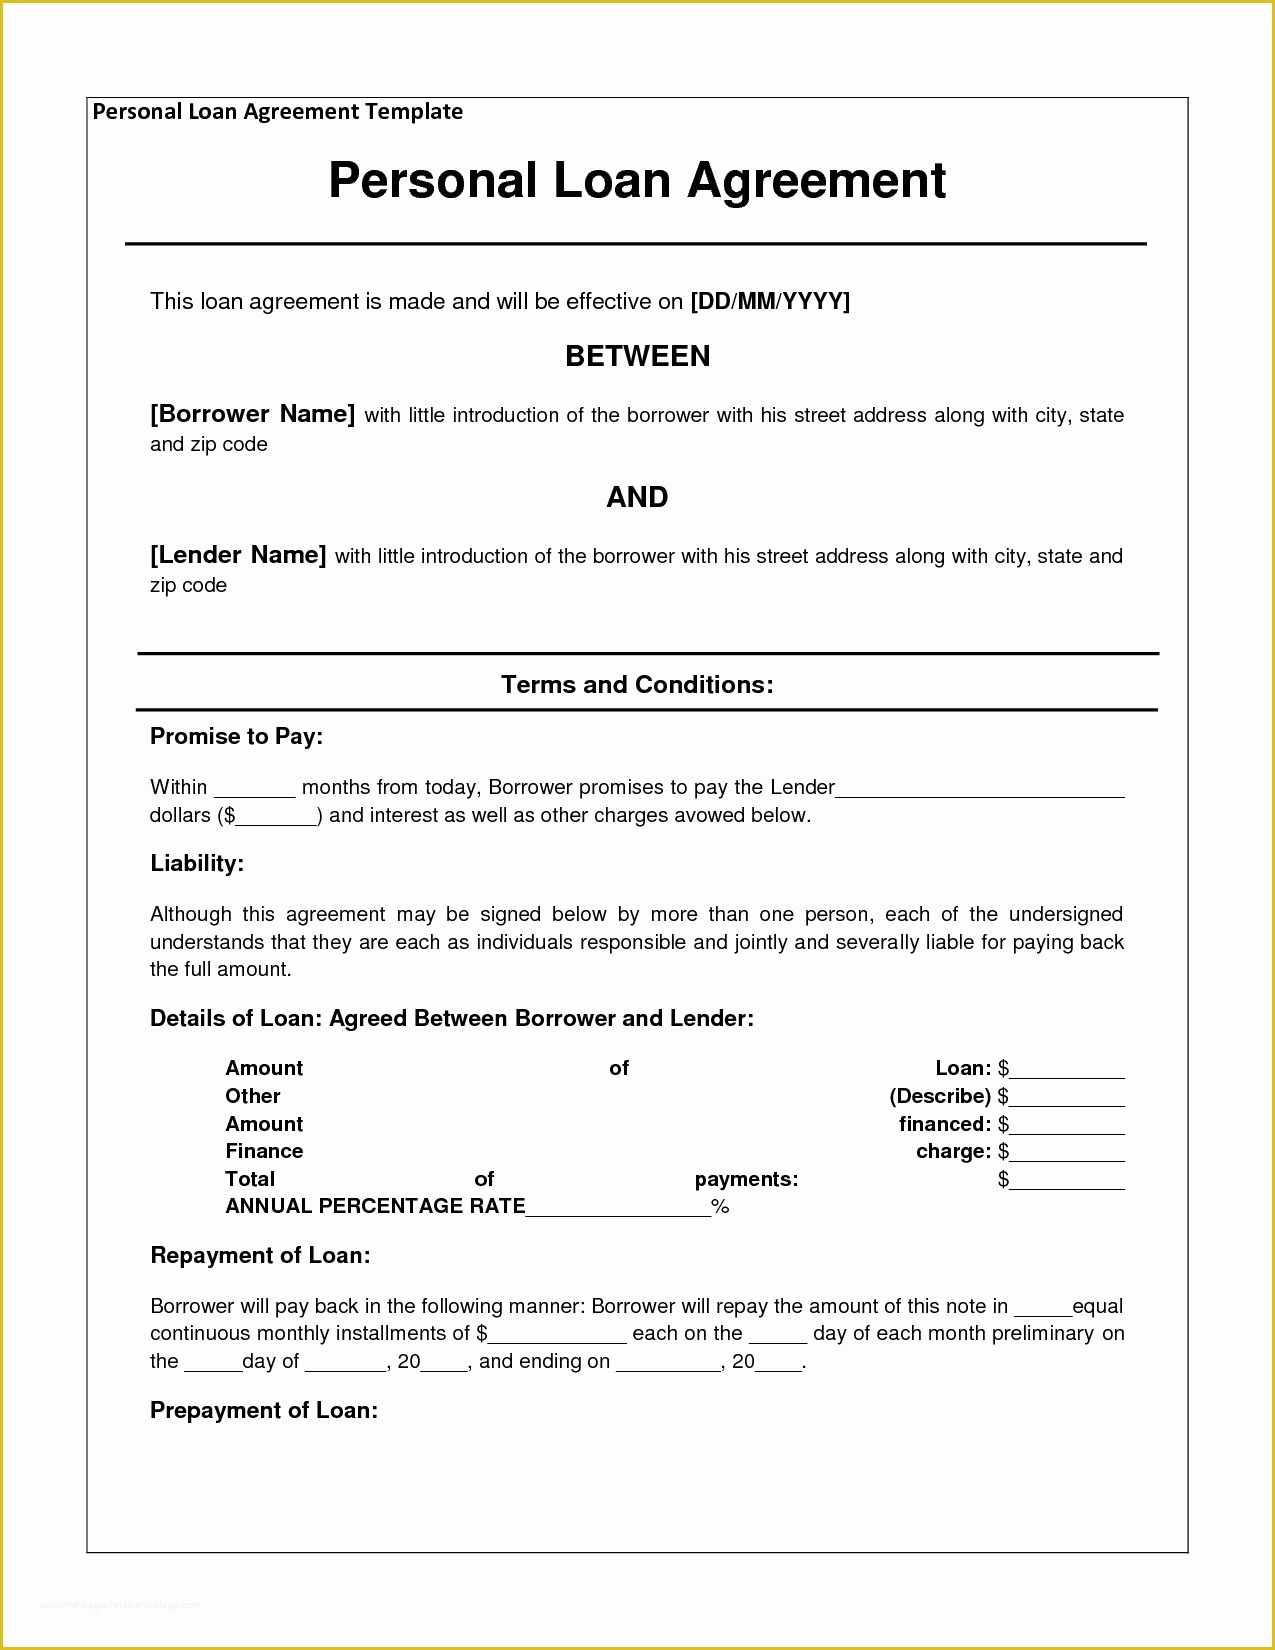 Unsecured Loan Agreement Template Free Of Free Personal Loan Agreement form Template $1000